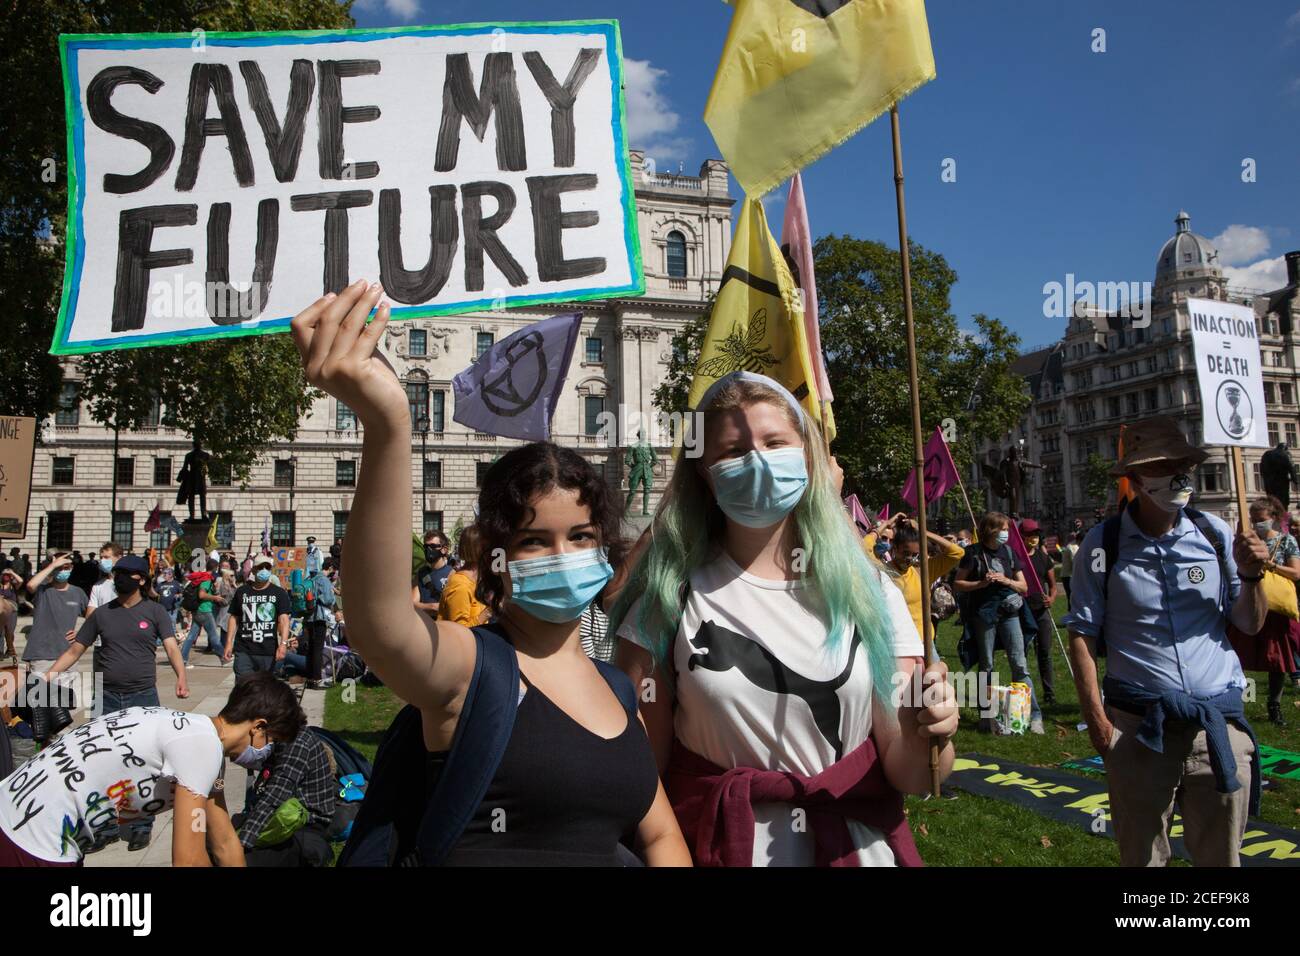 London, UK, 1 Sept. 2020: Extinction Rebellion protestors marched on Parliament Square and breached police lines to close surrounding roads. A few arrests were made. The environmental campaigners are calling for MPs to support the Climate and Ecological Emergencies Bill (CEE Bill). Anna Watson/Alamy Live News Stock Photo